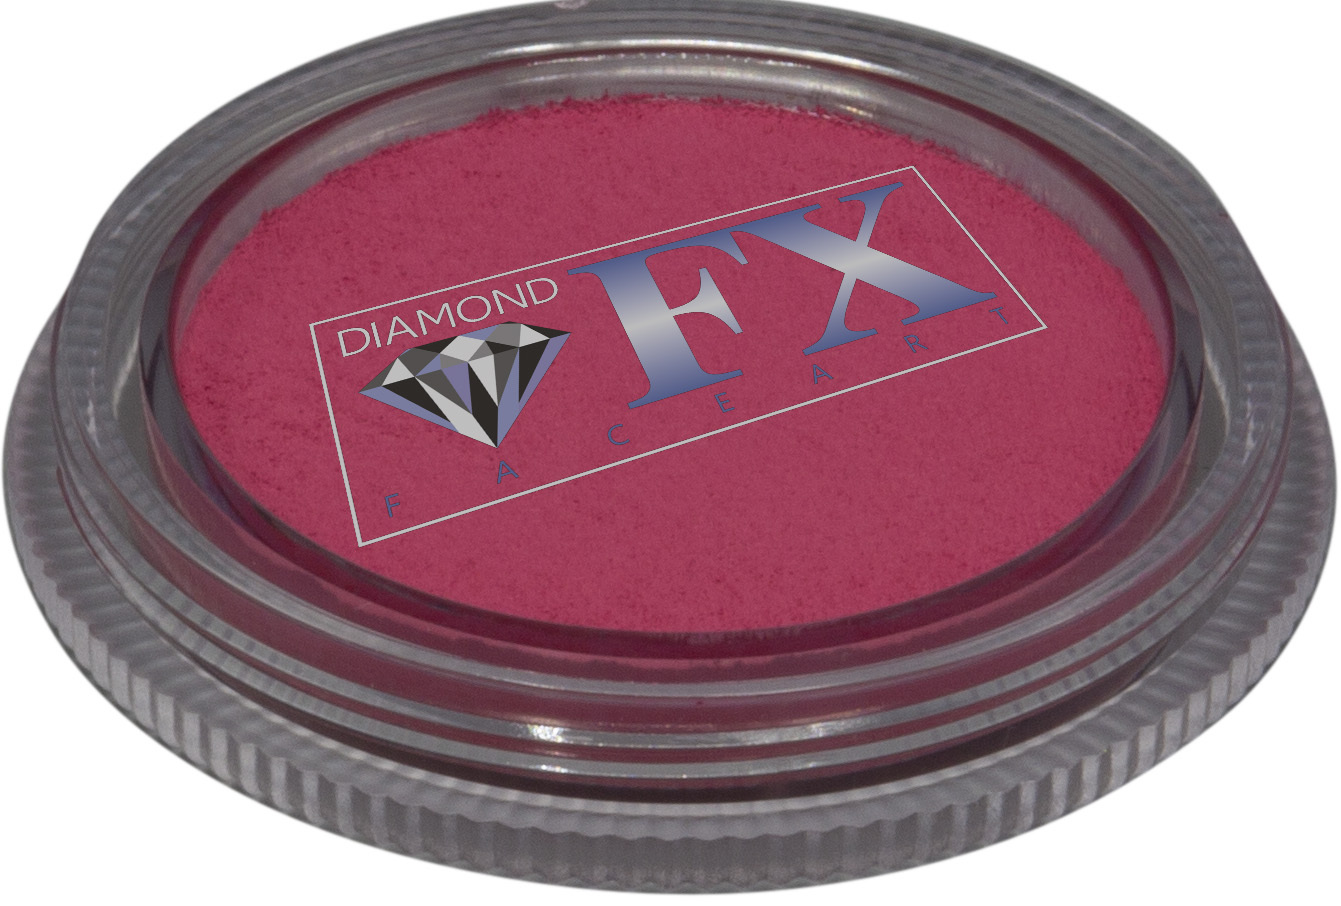 Diamond FX Ruby Red 30g - Small Image